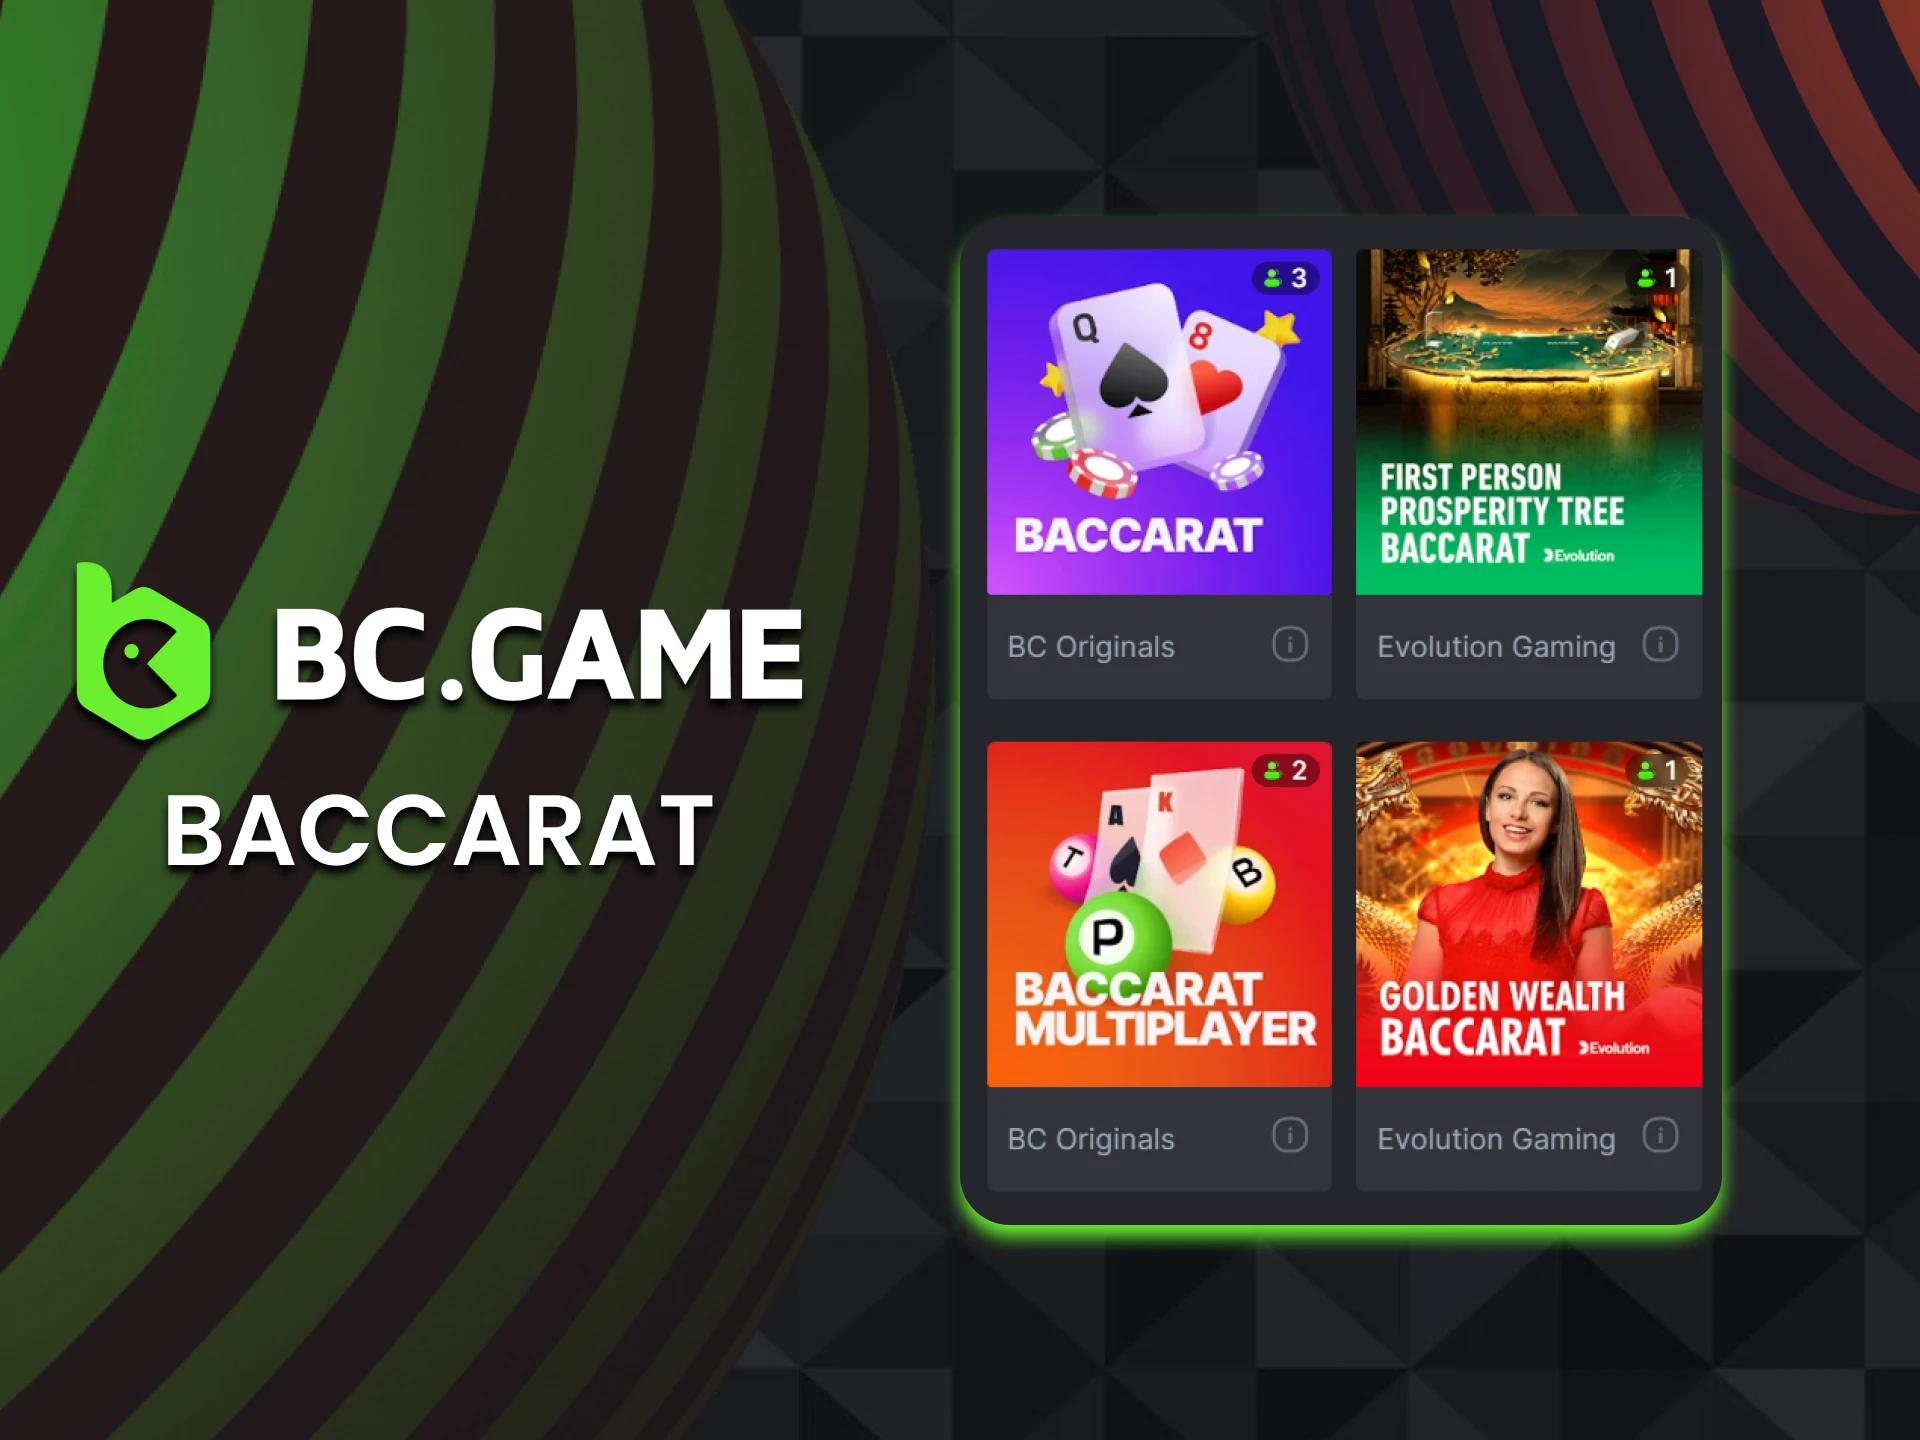 Play baccarat with BC Game.